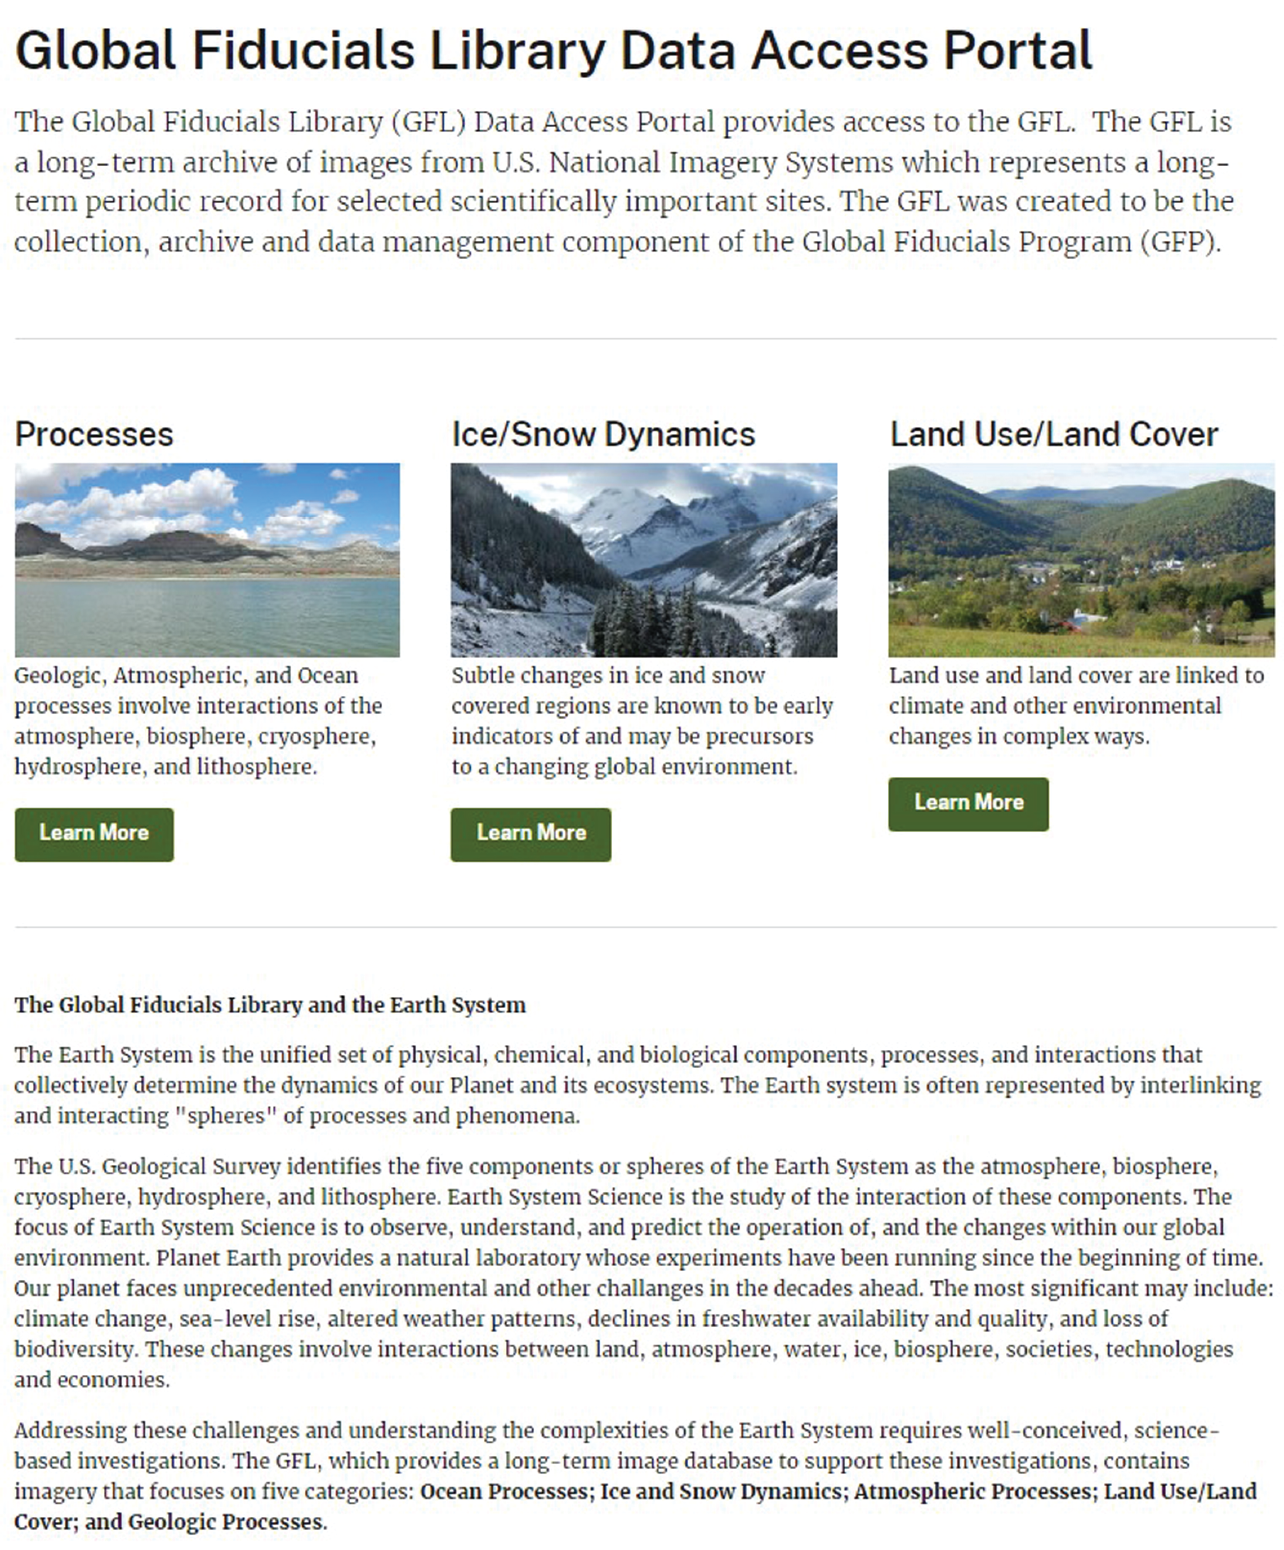 Text and 3 photos are reproduced from the web page for the Global Fiducials Library
                     Data Access Portal, which has imagery focused on 5 categories.